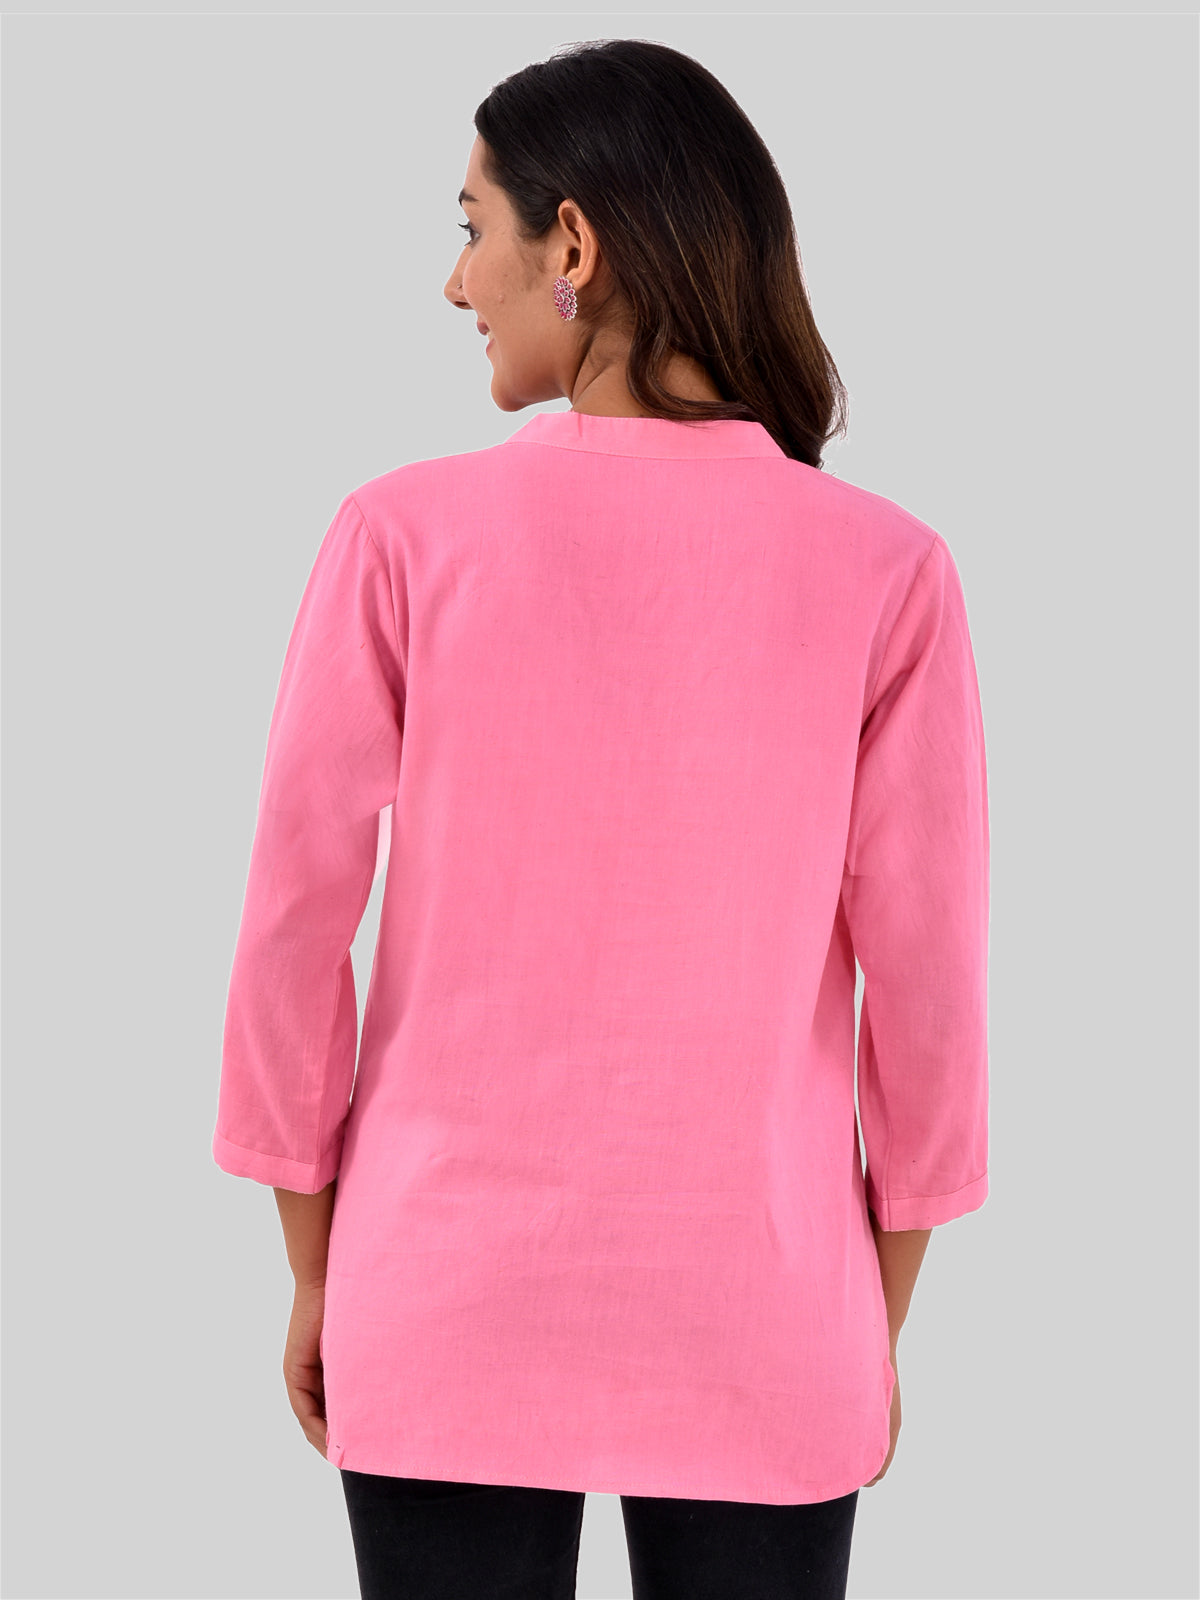 Pack Of 2 Womens Regular Fit Pink And Wine Three Fourth Sleeve Cotton Tops Combo